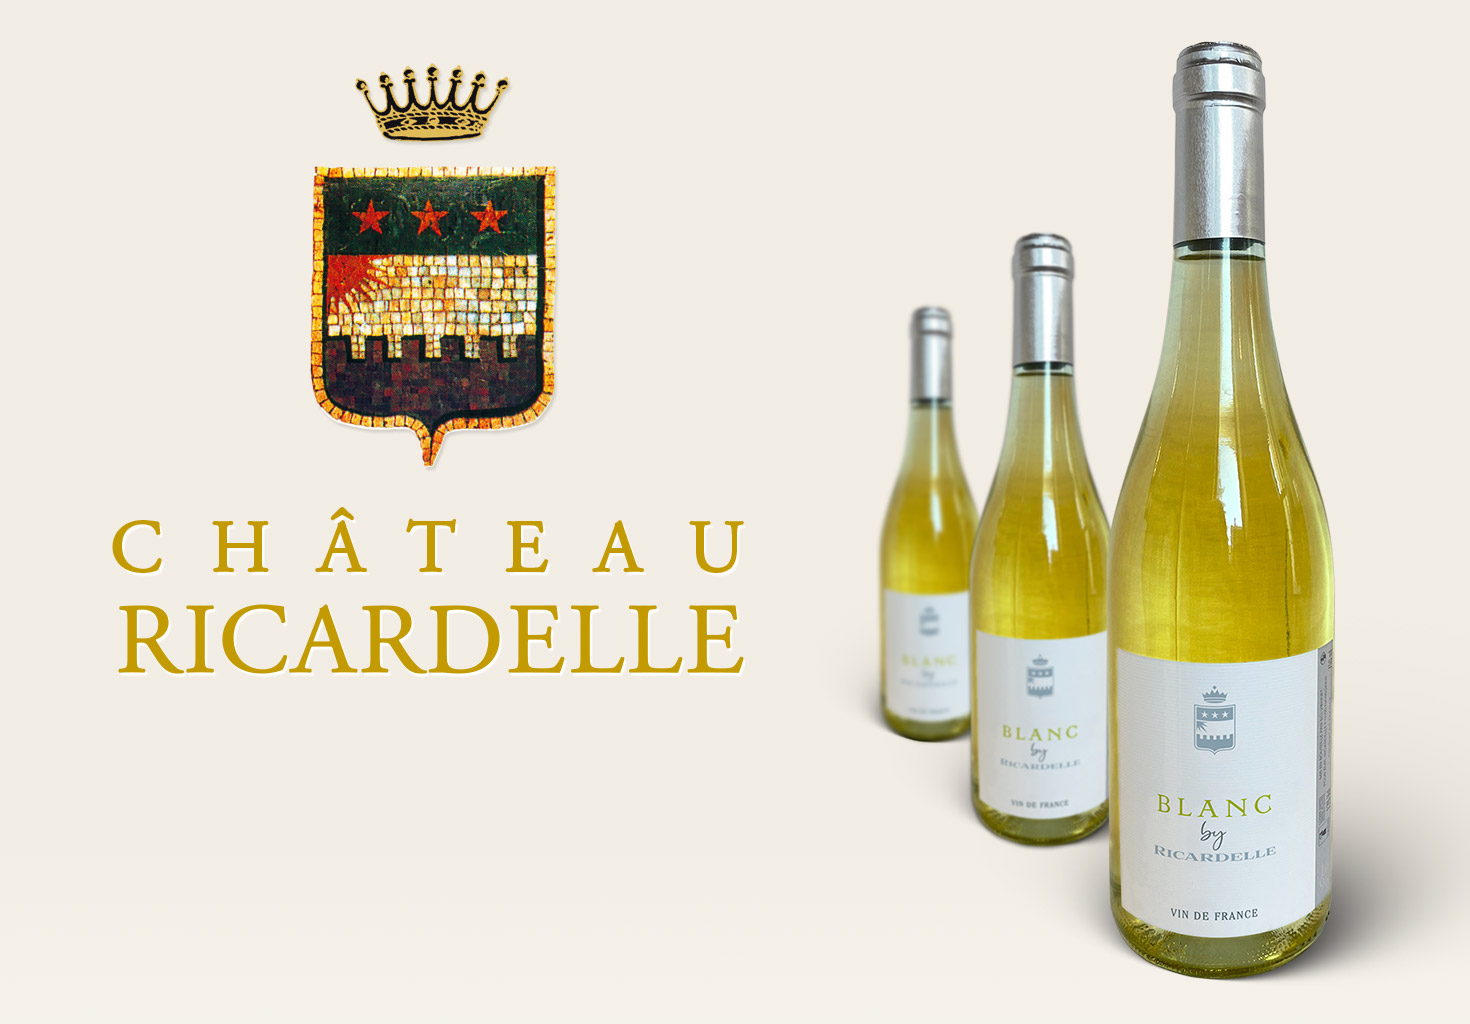 CHATEAU RICARDELLE - Blanc By Ricardelle